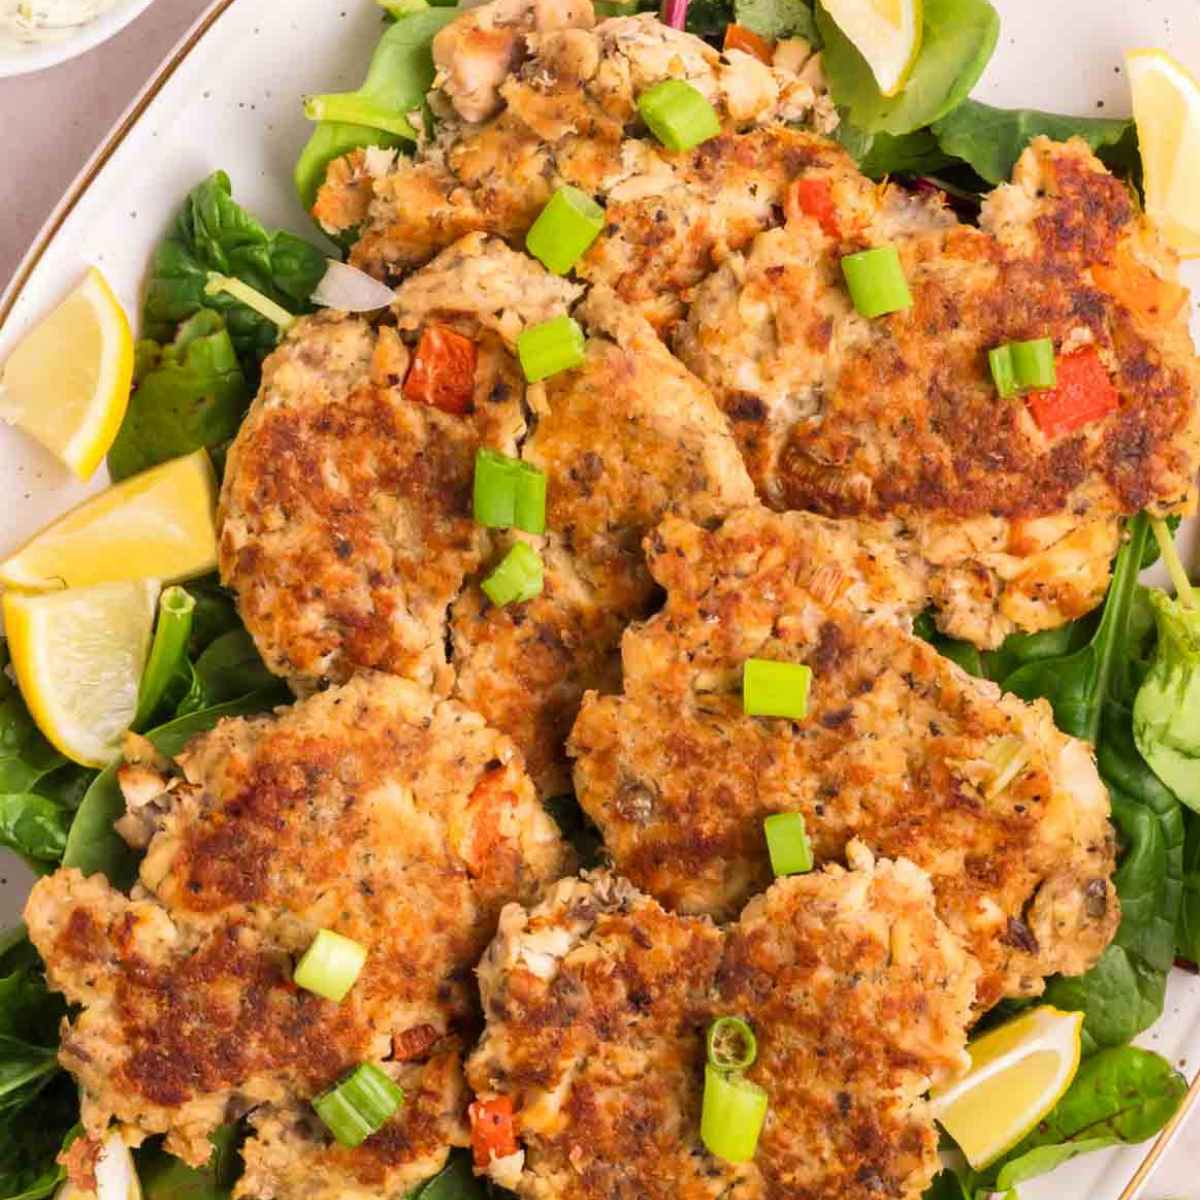 Featured image of salmon cakes made with canned salmon on a serving dish.